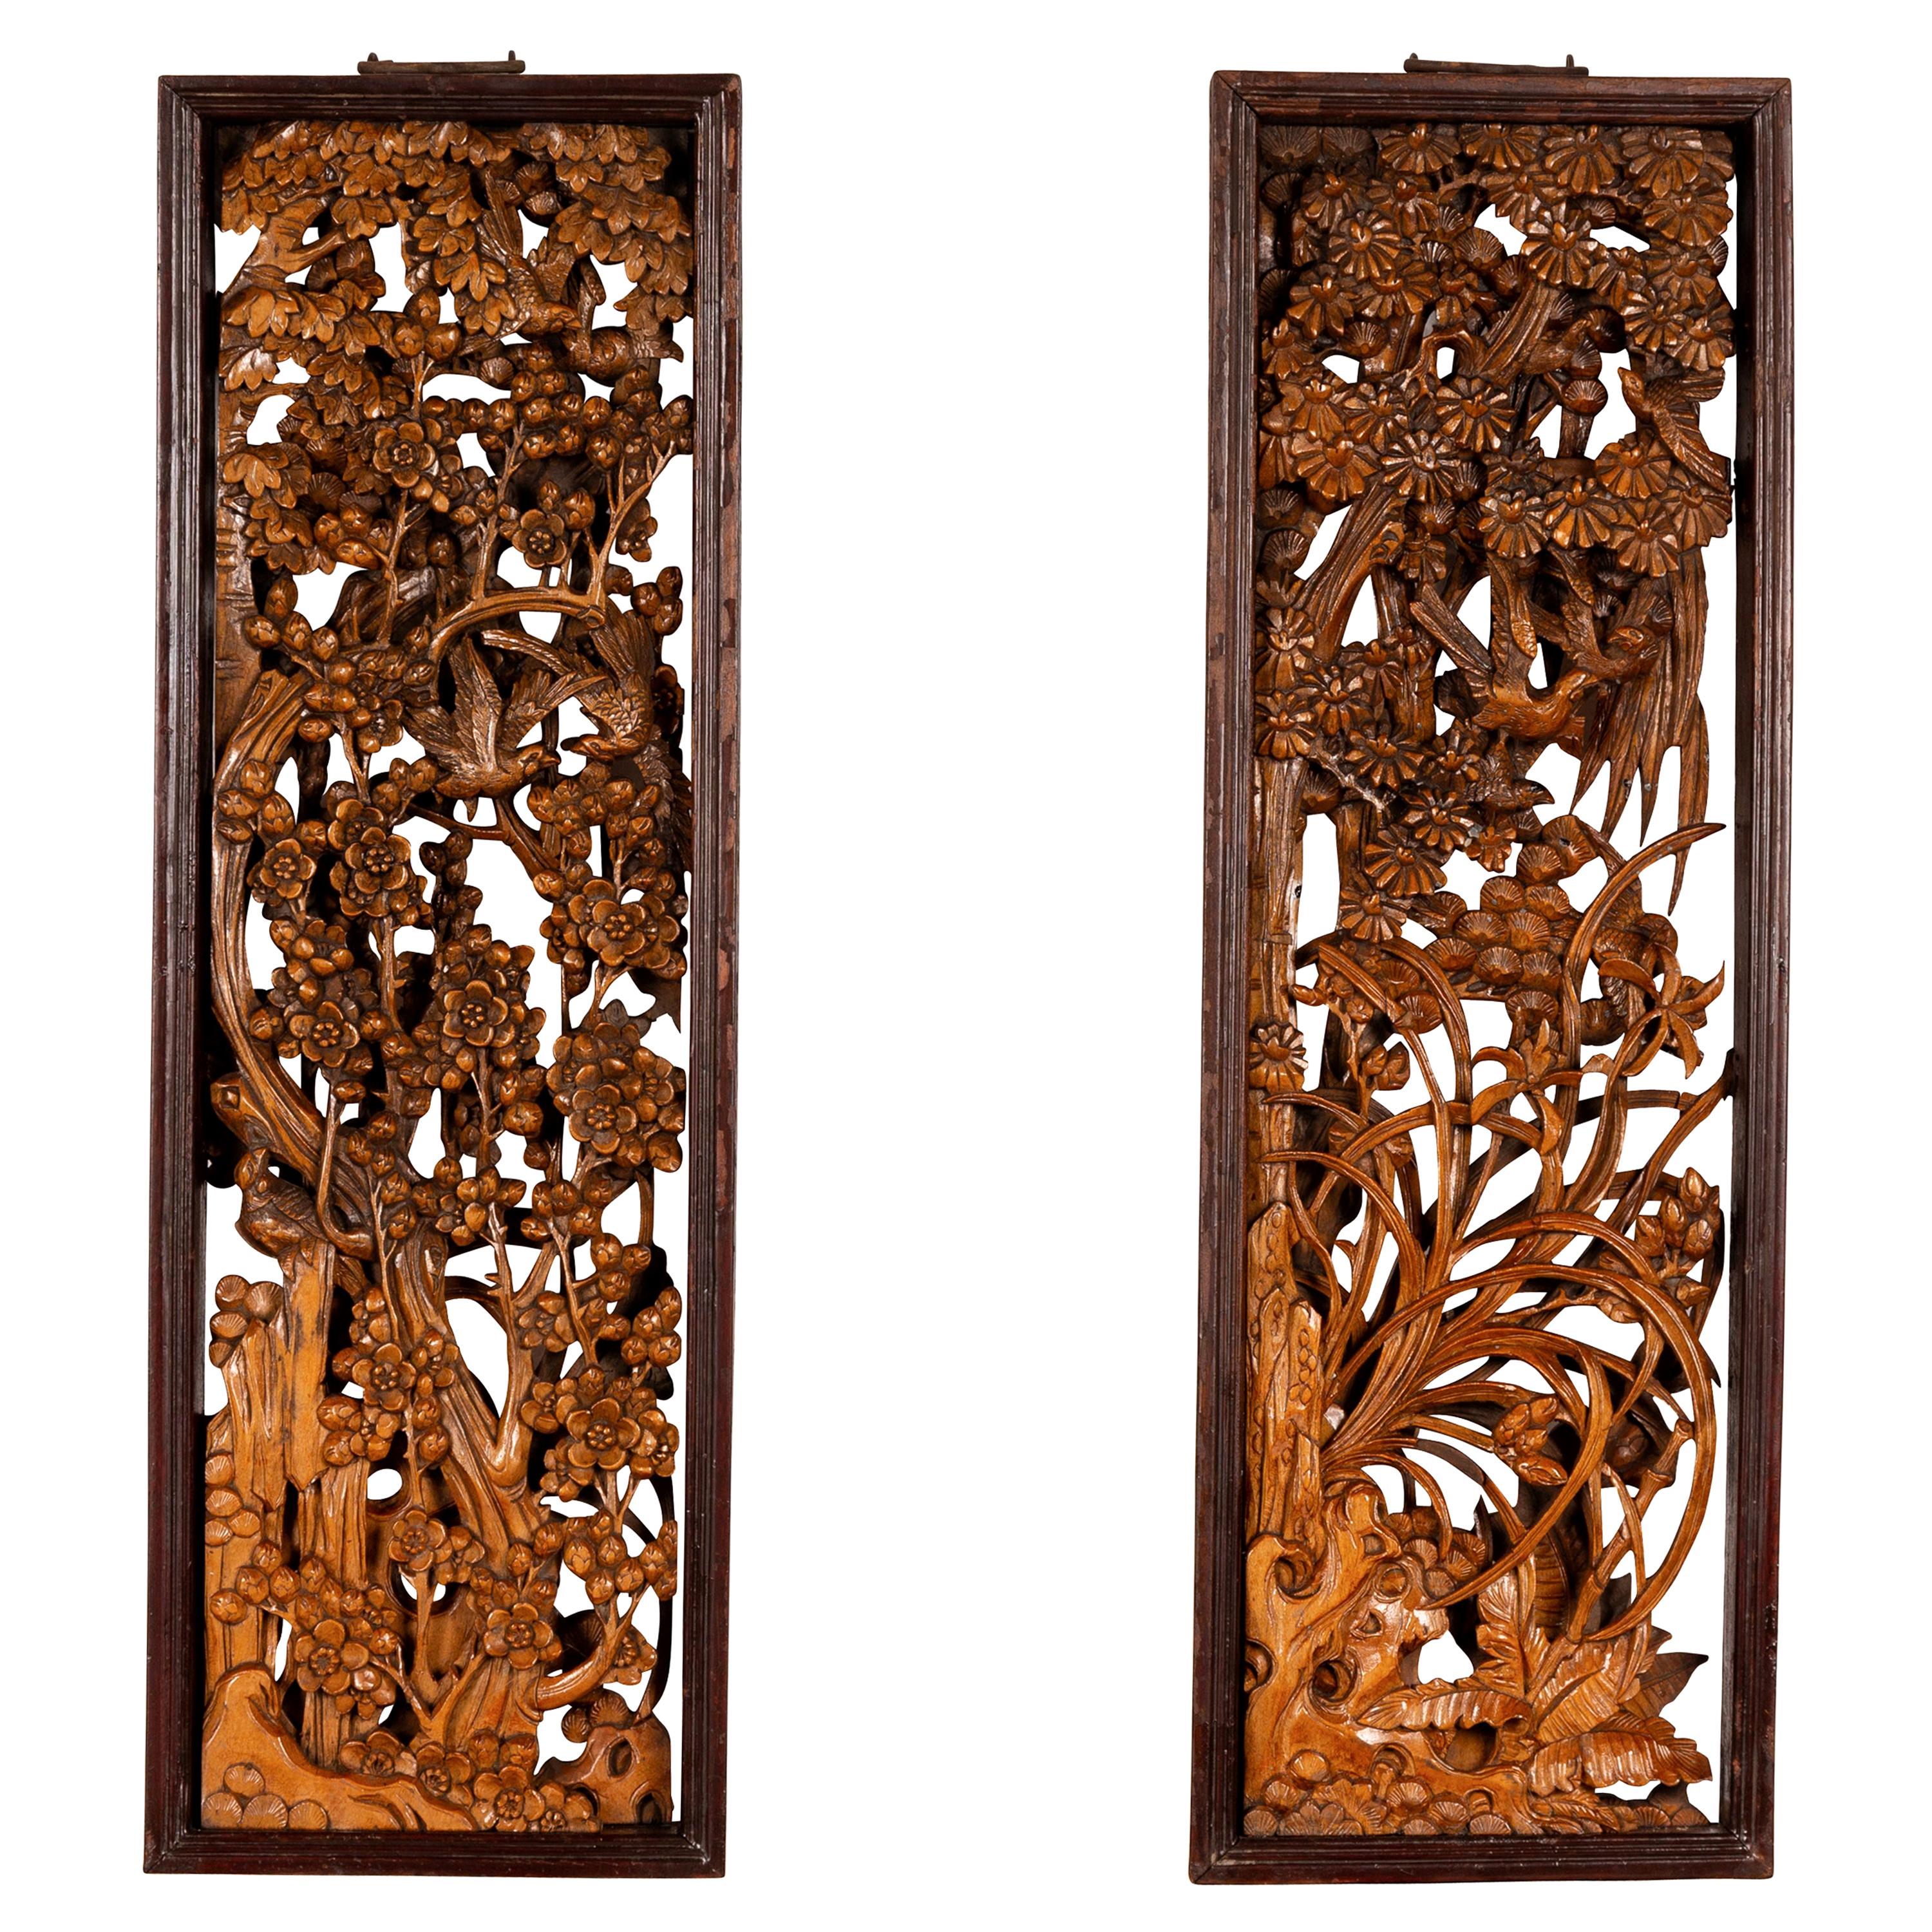 Pair of Chinese Vintage Carved Elmwood Wall Panels with Birds and Foliage Motifs